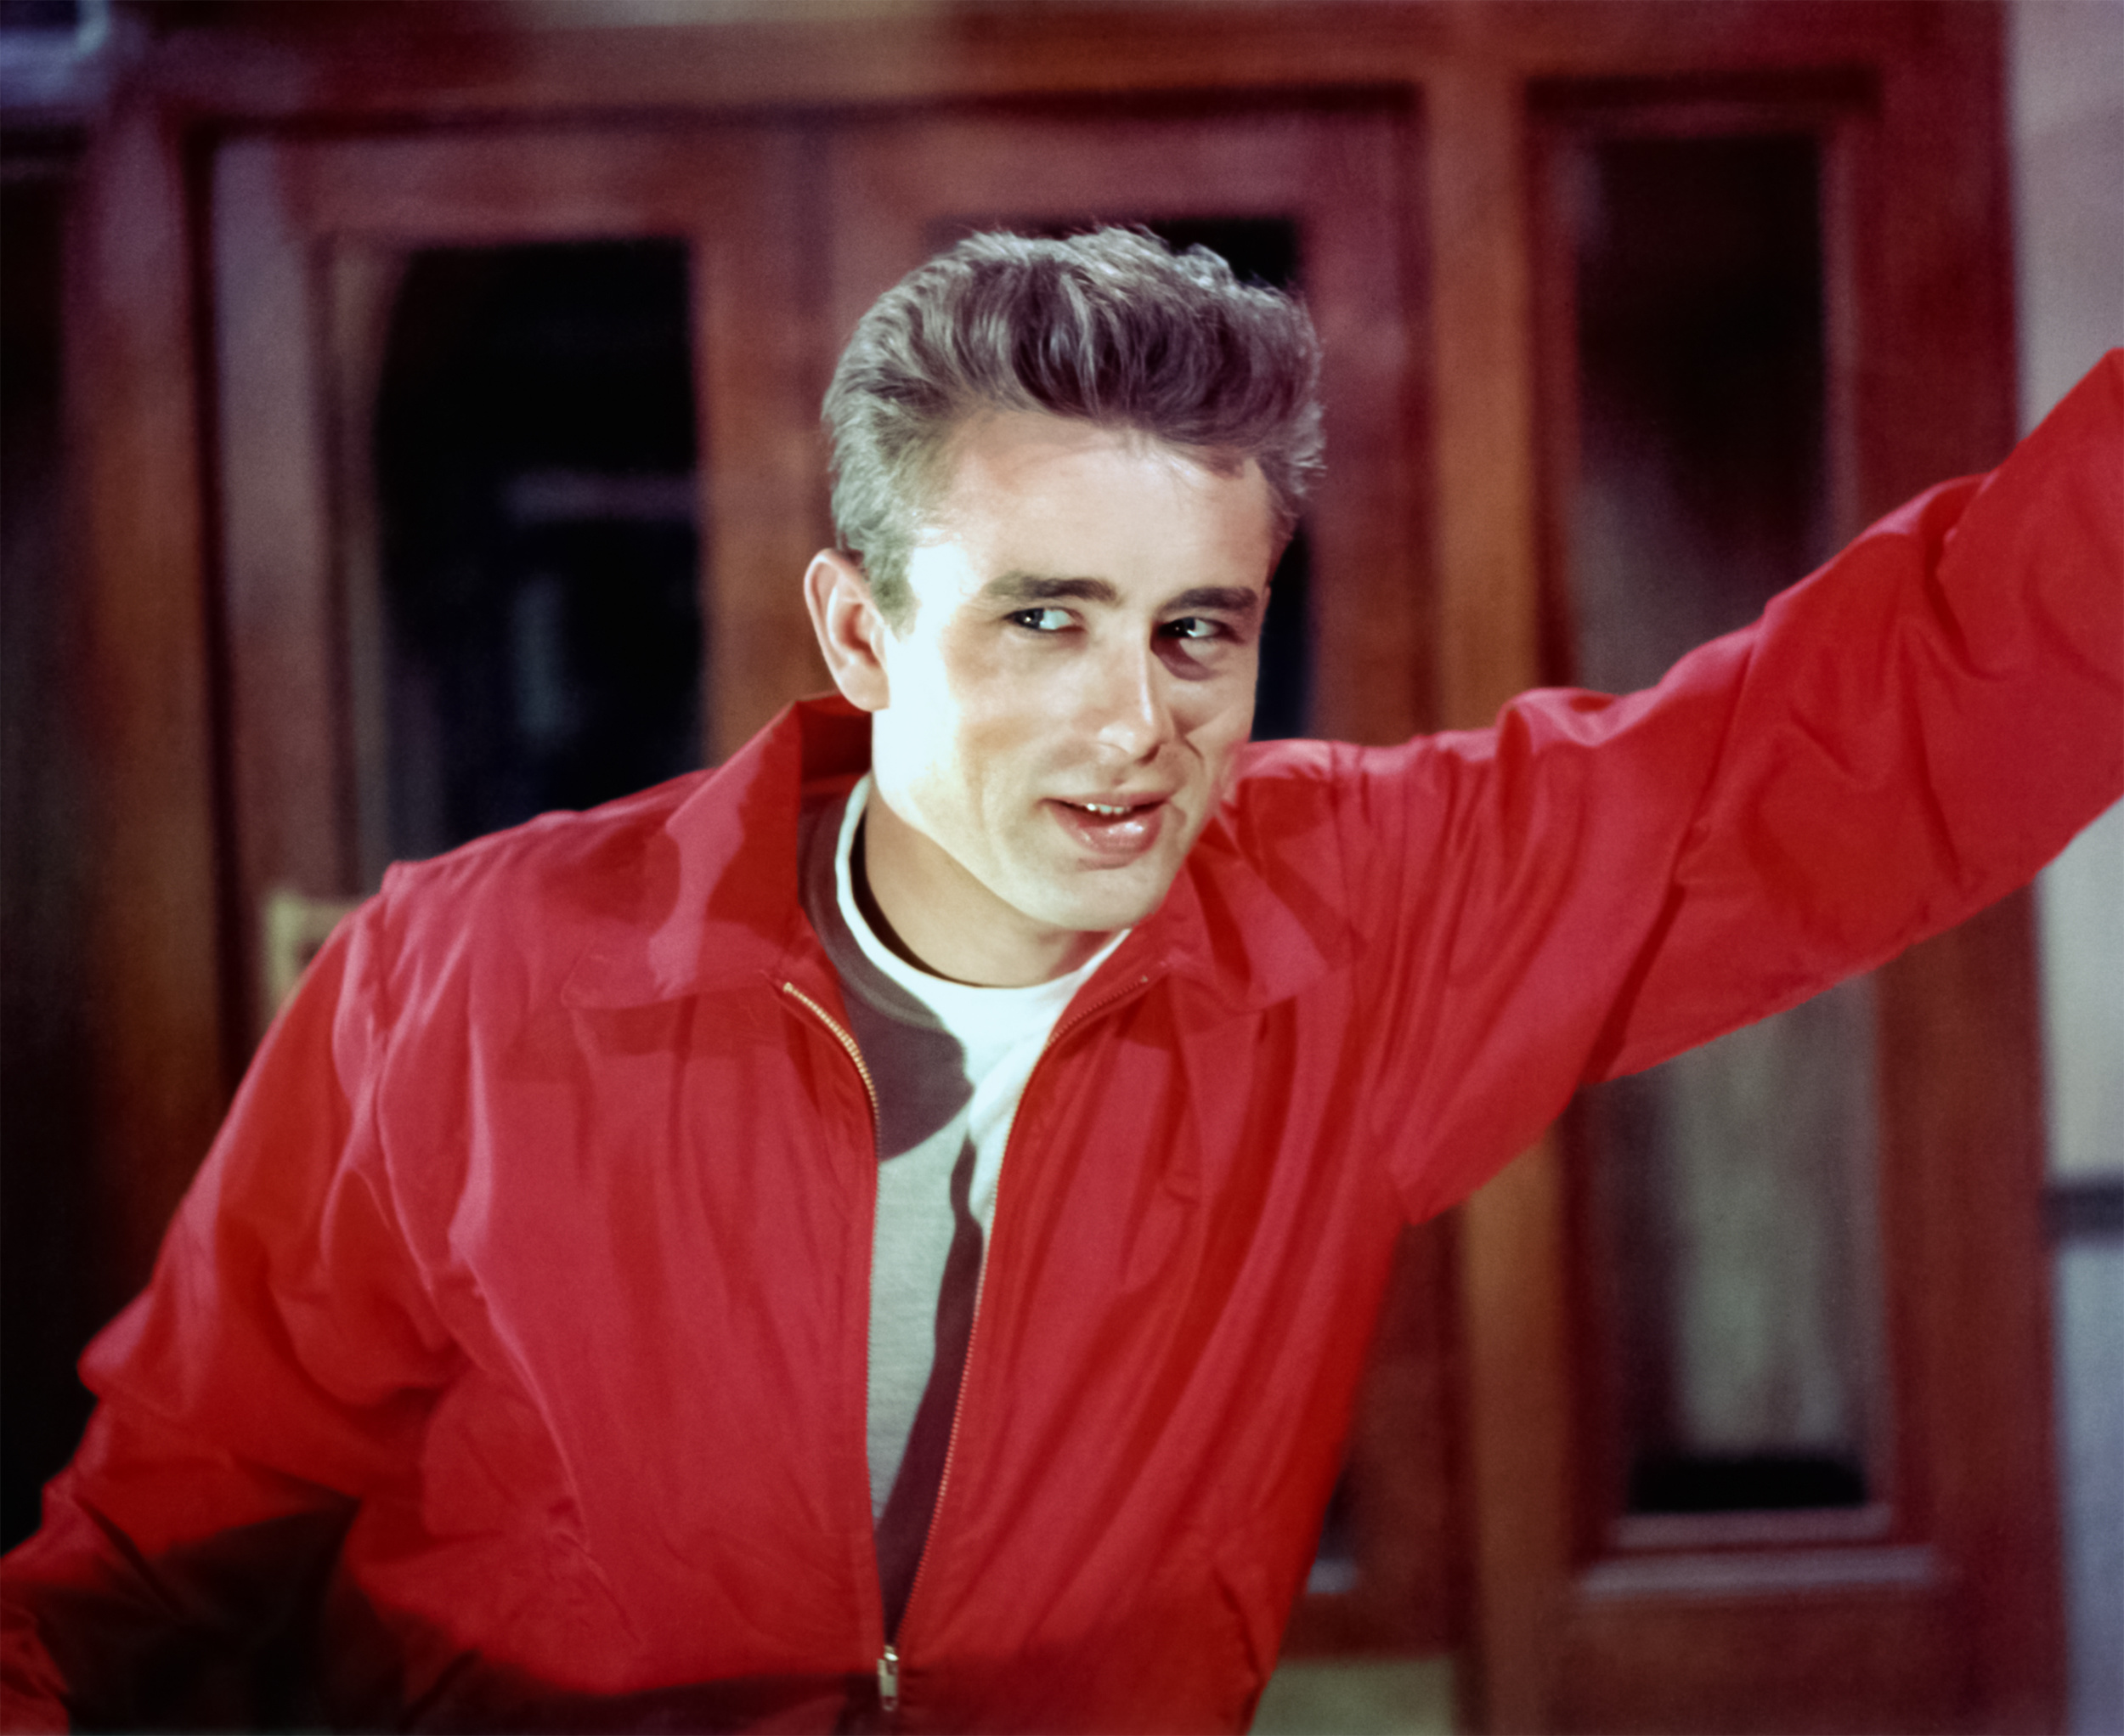 <p><a href="https://www.youtube.com/watch?v=7014C_6ABAg">James Dean's claim to fame</a>. It was one of the first films to tackle the subject of kids challenging their parents through rebellion that was not associated with the wholesome family dynamic. Its subject matter wasn't depicted widely on screen. Dean's Jim Stark is a bad boy who also exerts a level of coolness for which guys wanted to be him, and girls wanted to be with him. </p><p>You may also like: <a href='https://www.yardbarker.com/entertainment/articles/the_most_memorable_killer_animals_in_movies/s1__37871586'>The most memorable killer animals in movies</a></p>